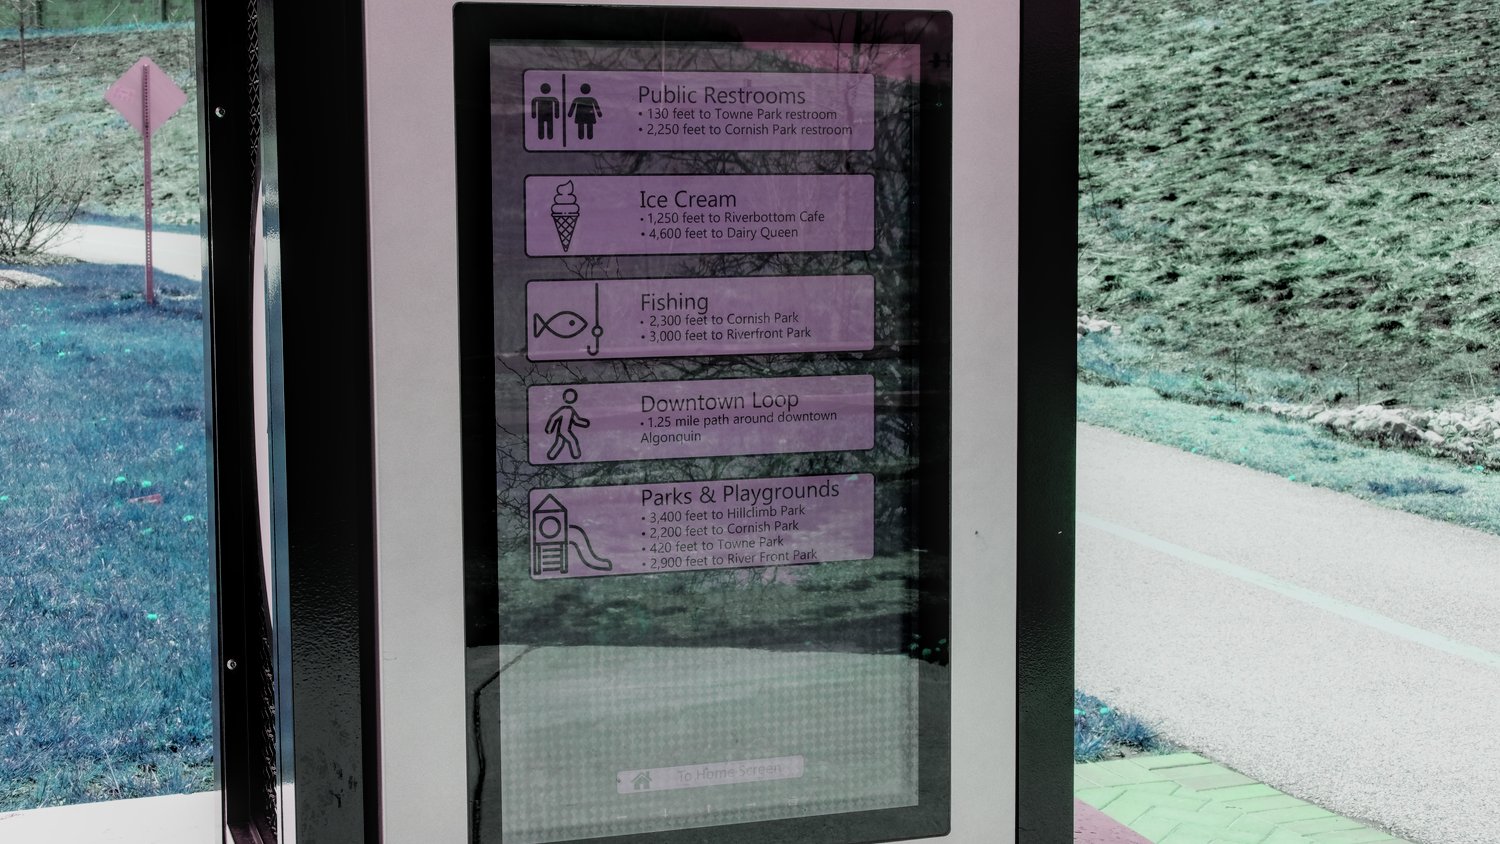 A digital kiosk provides information about what's nearby.